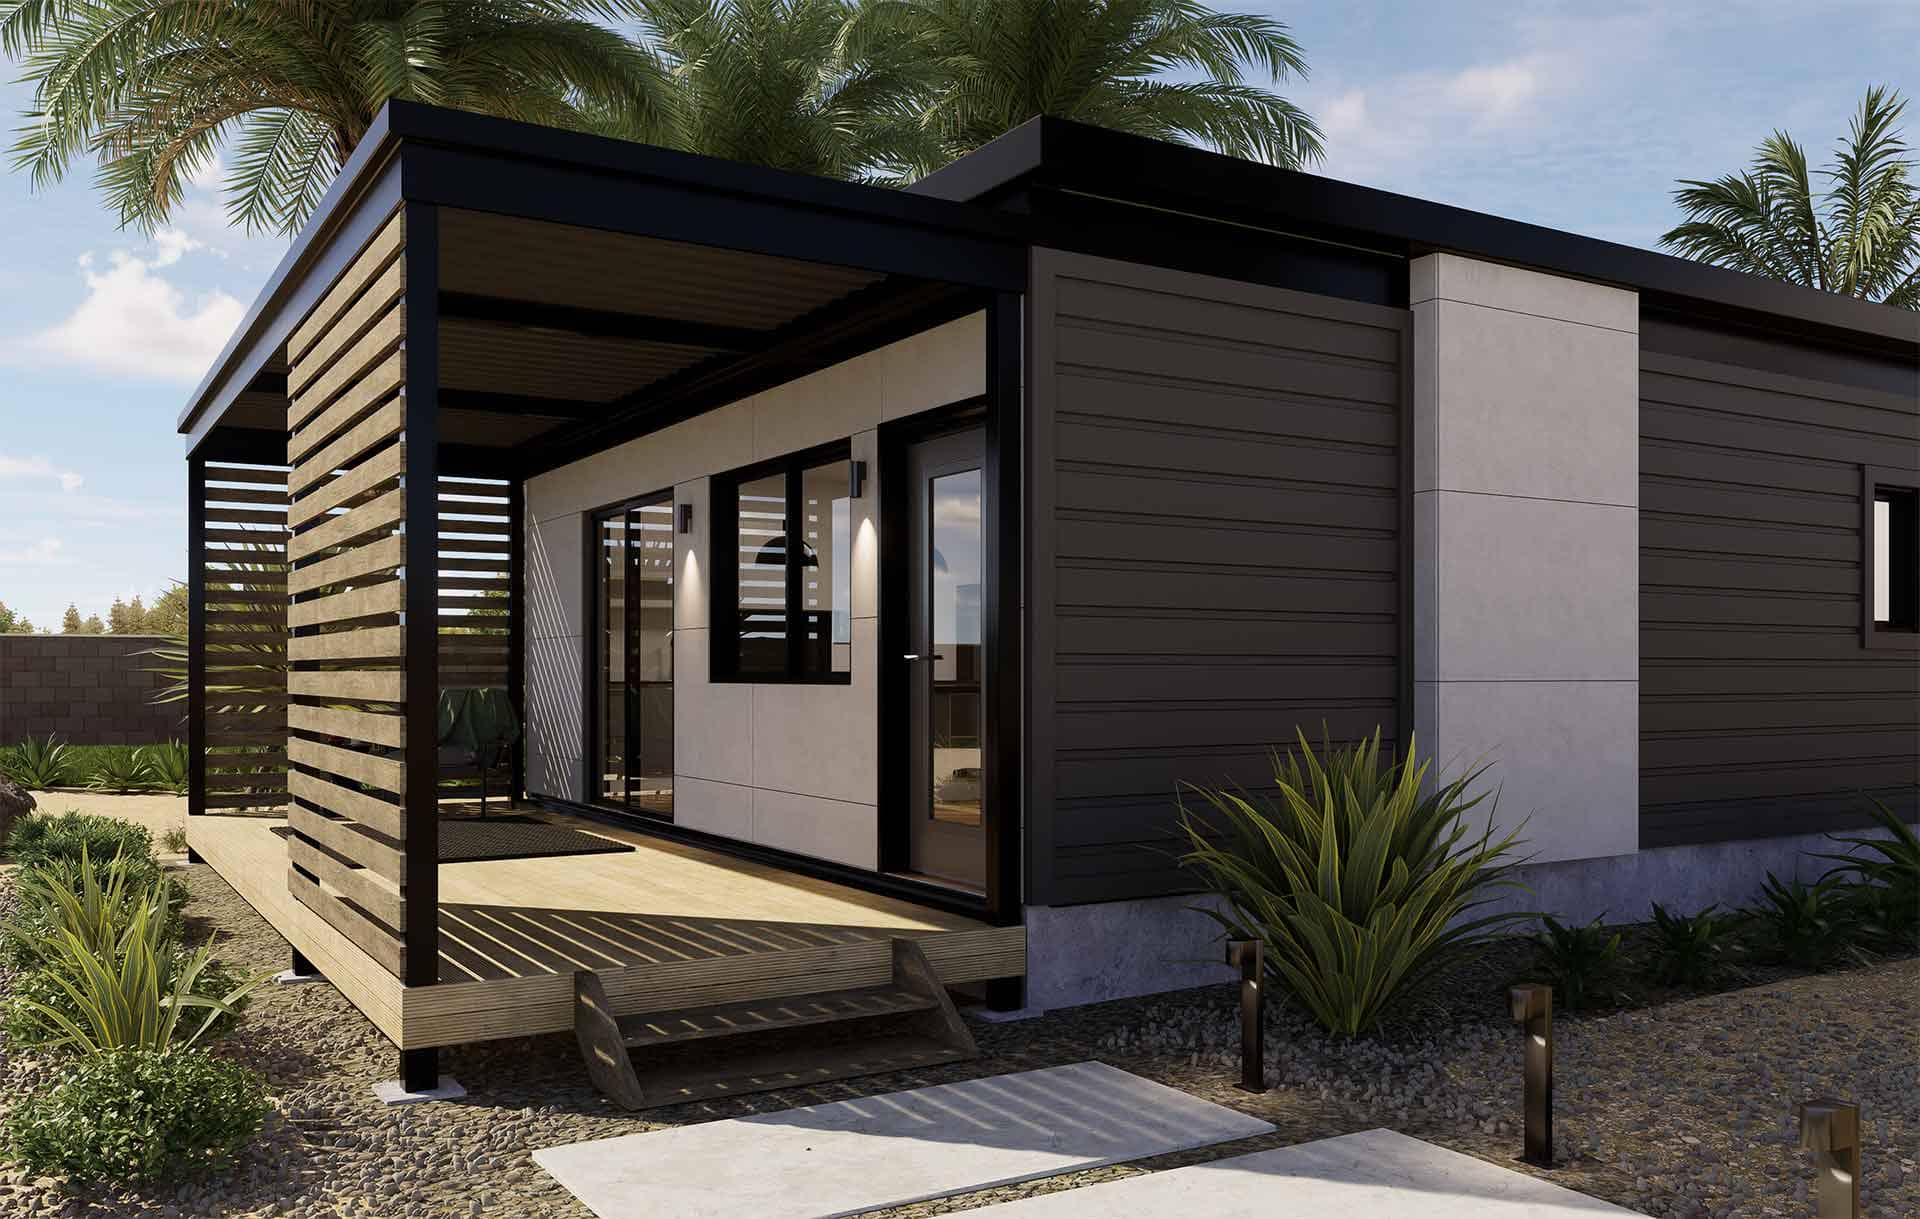 The exterior facade of the ADU 960 model reflects modern architectural elegance with its clean lines and contemporary material palette, promising a stylish addition to any property.